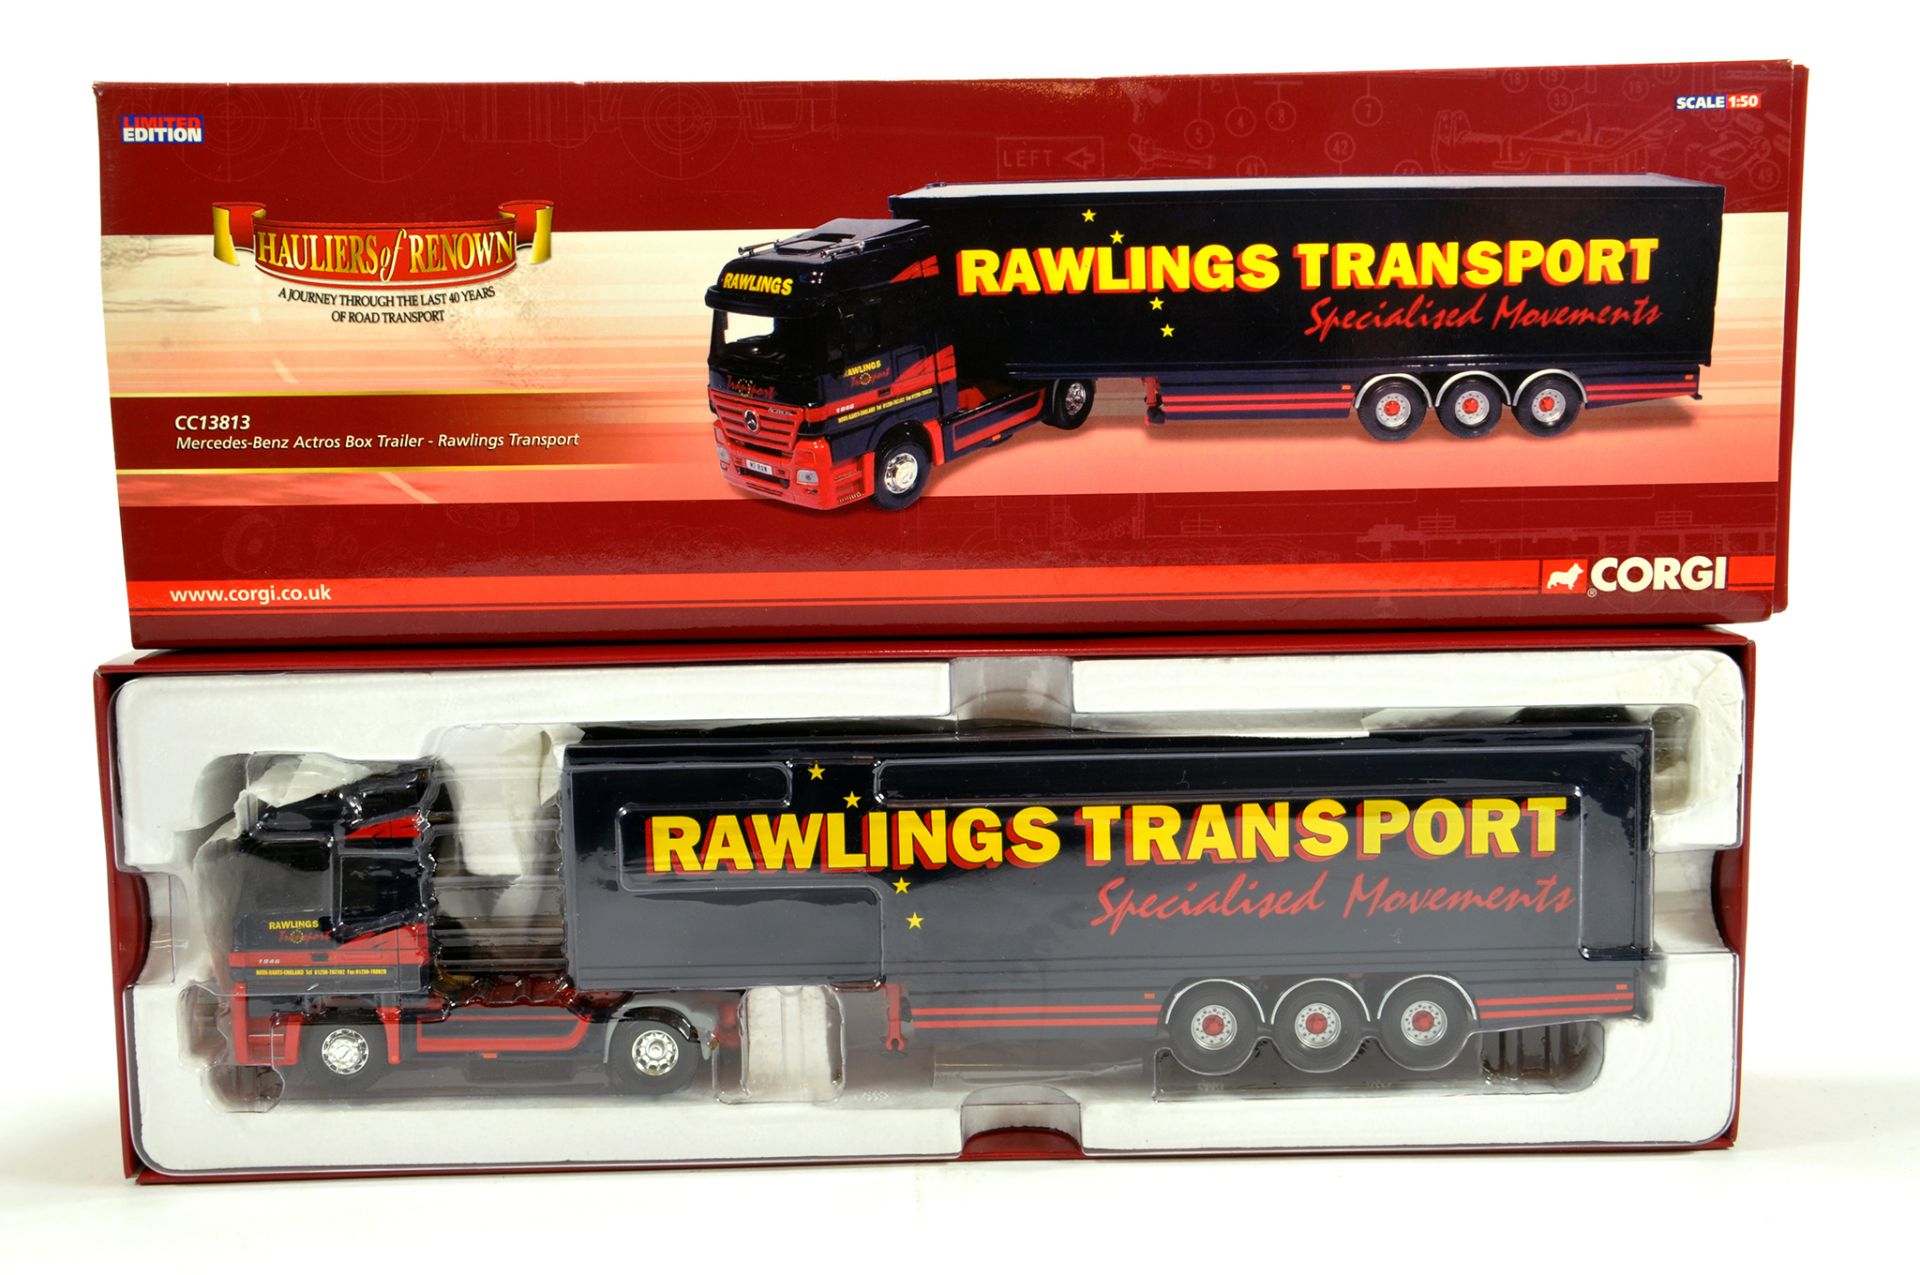 Corgi 1/50 Diecast Truck Issue Comprising No. CC13813 MB Actros Box Trailer in livery of Rawlings